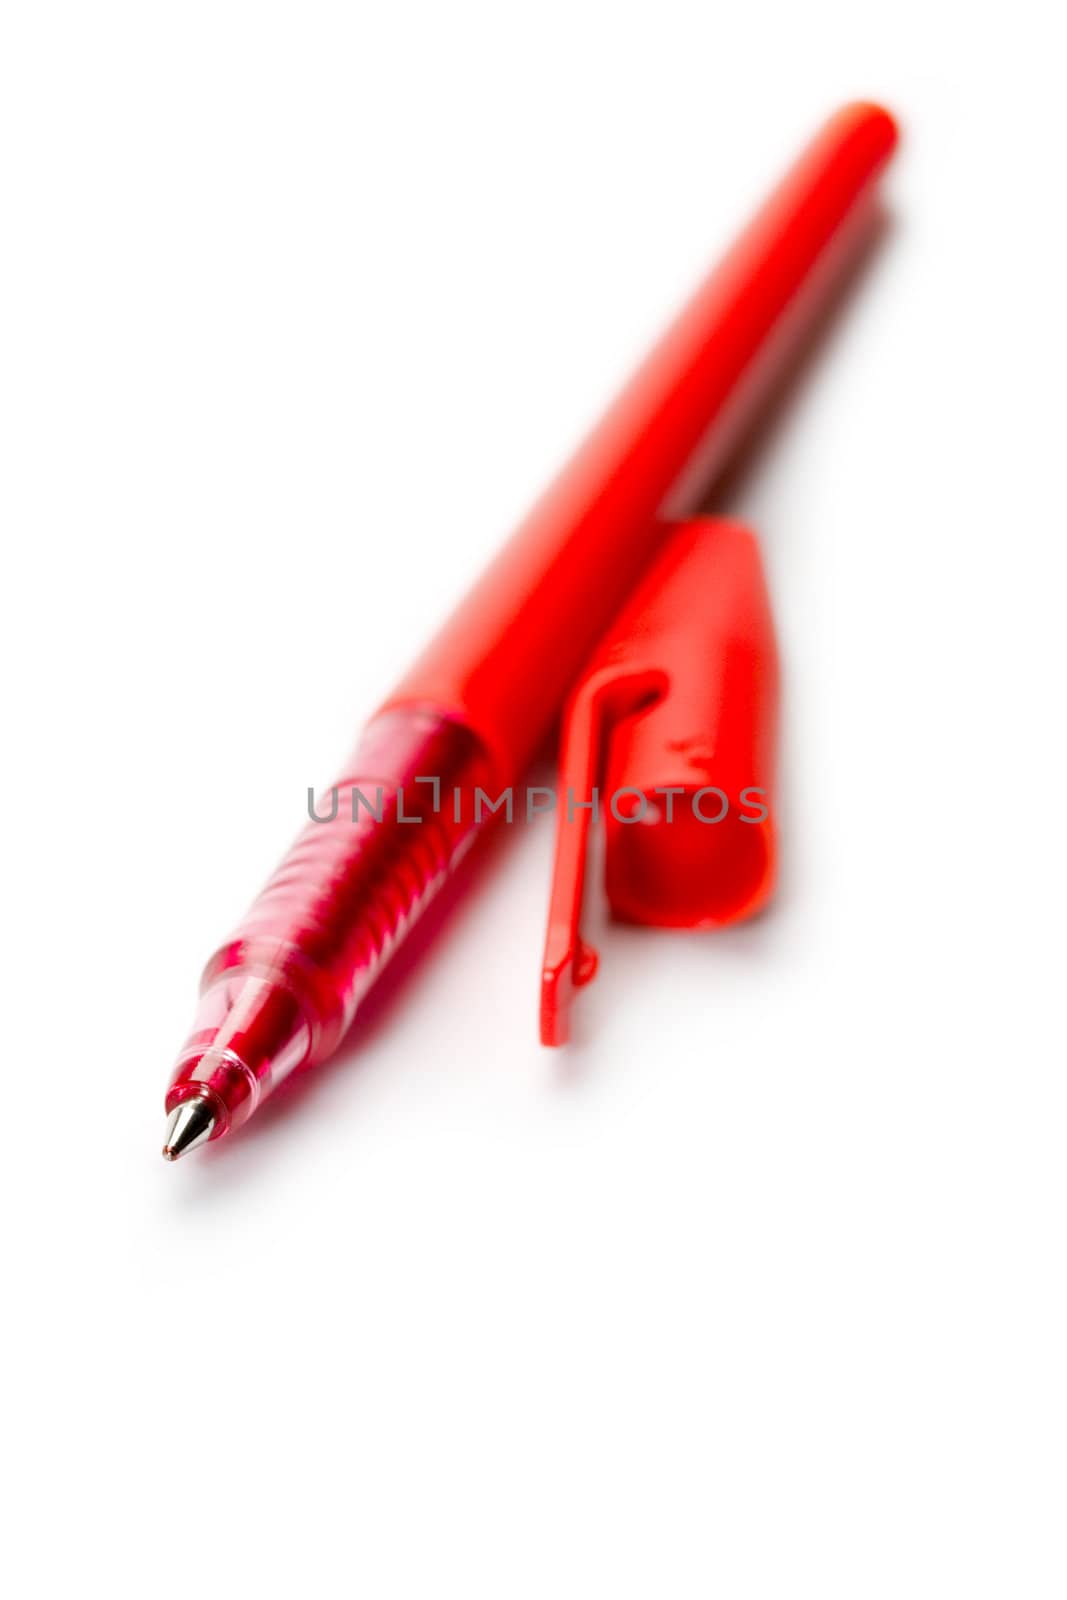 Pen isolated on white